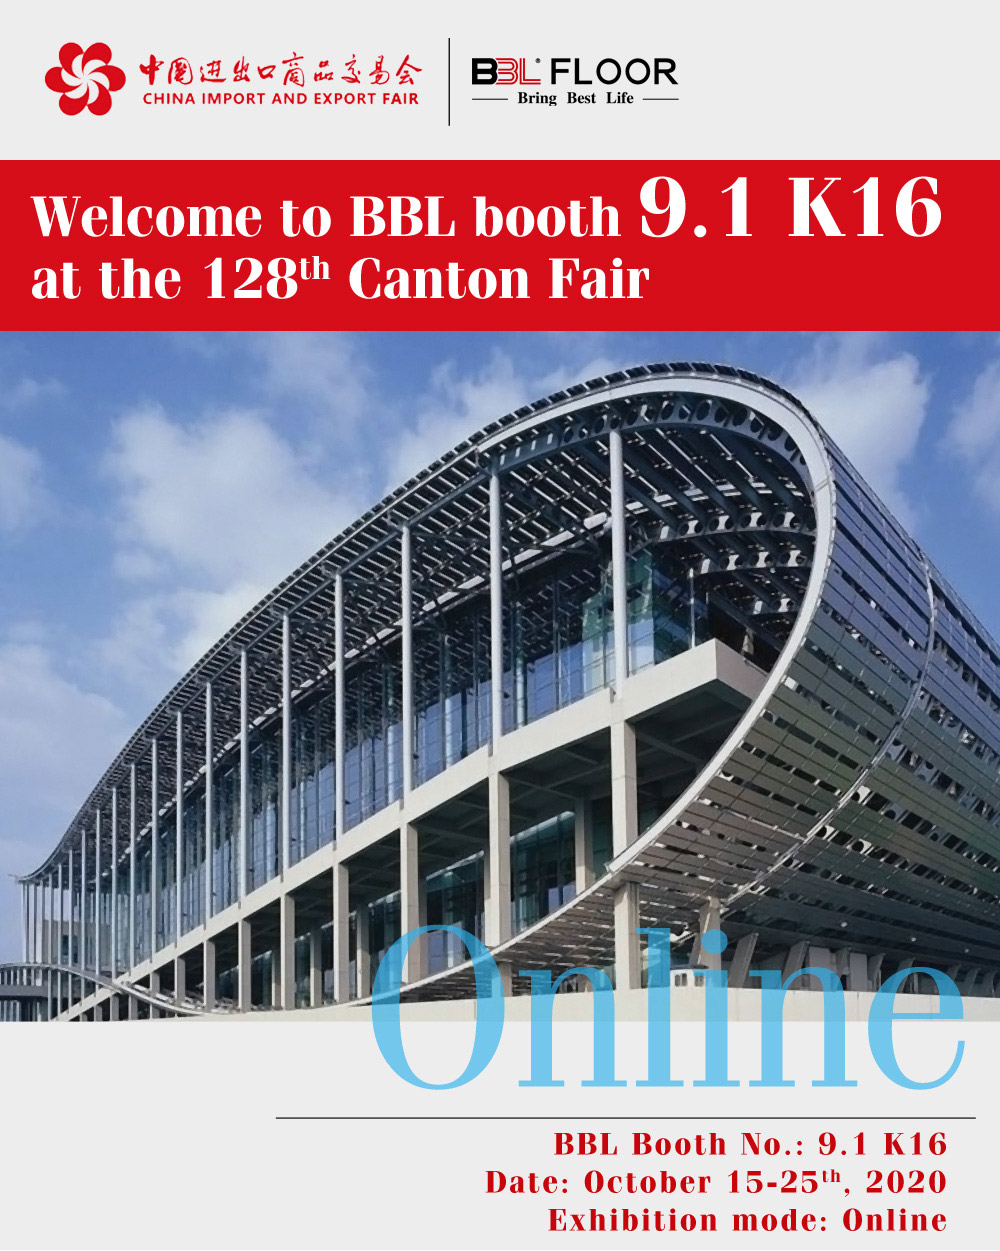 Welcome to BBL Booth 9.1 K16 at the 128th Canton Fair